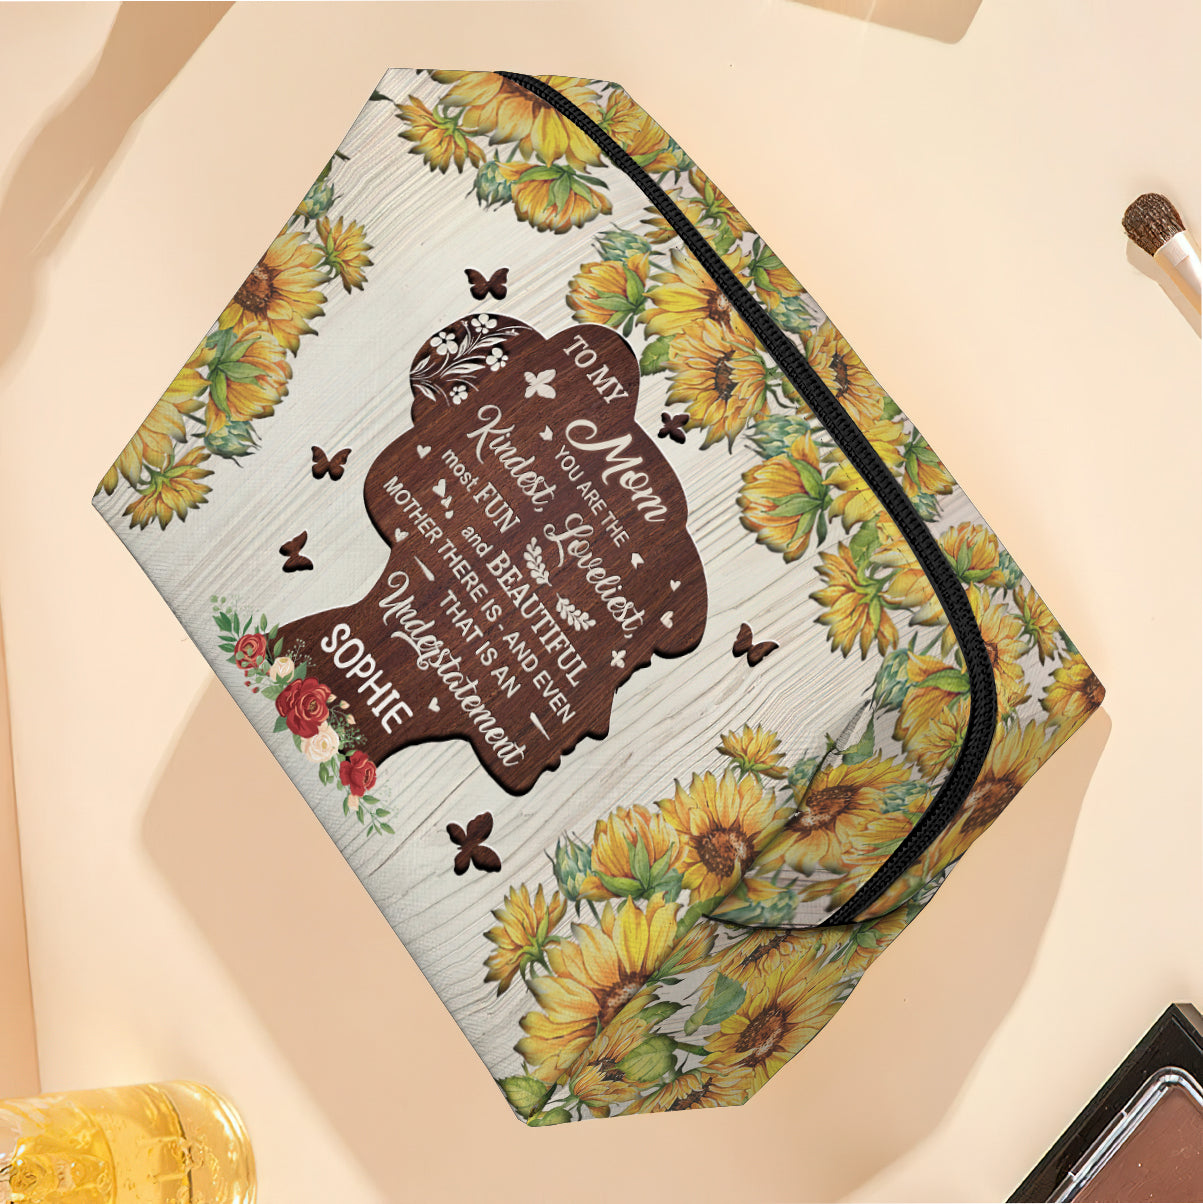 You Are The Kindest - Personalized Mother Makeup Bag